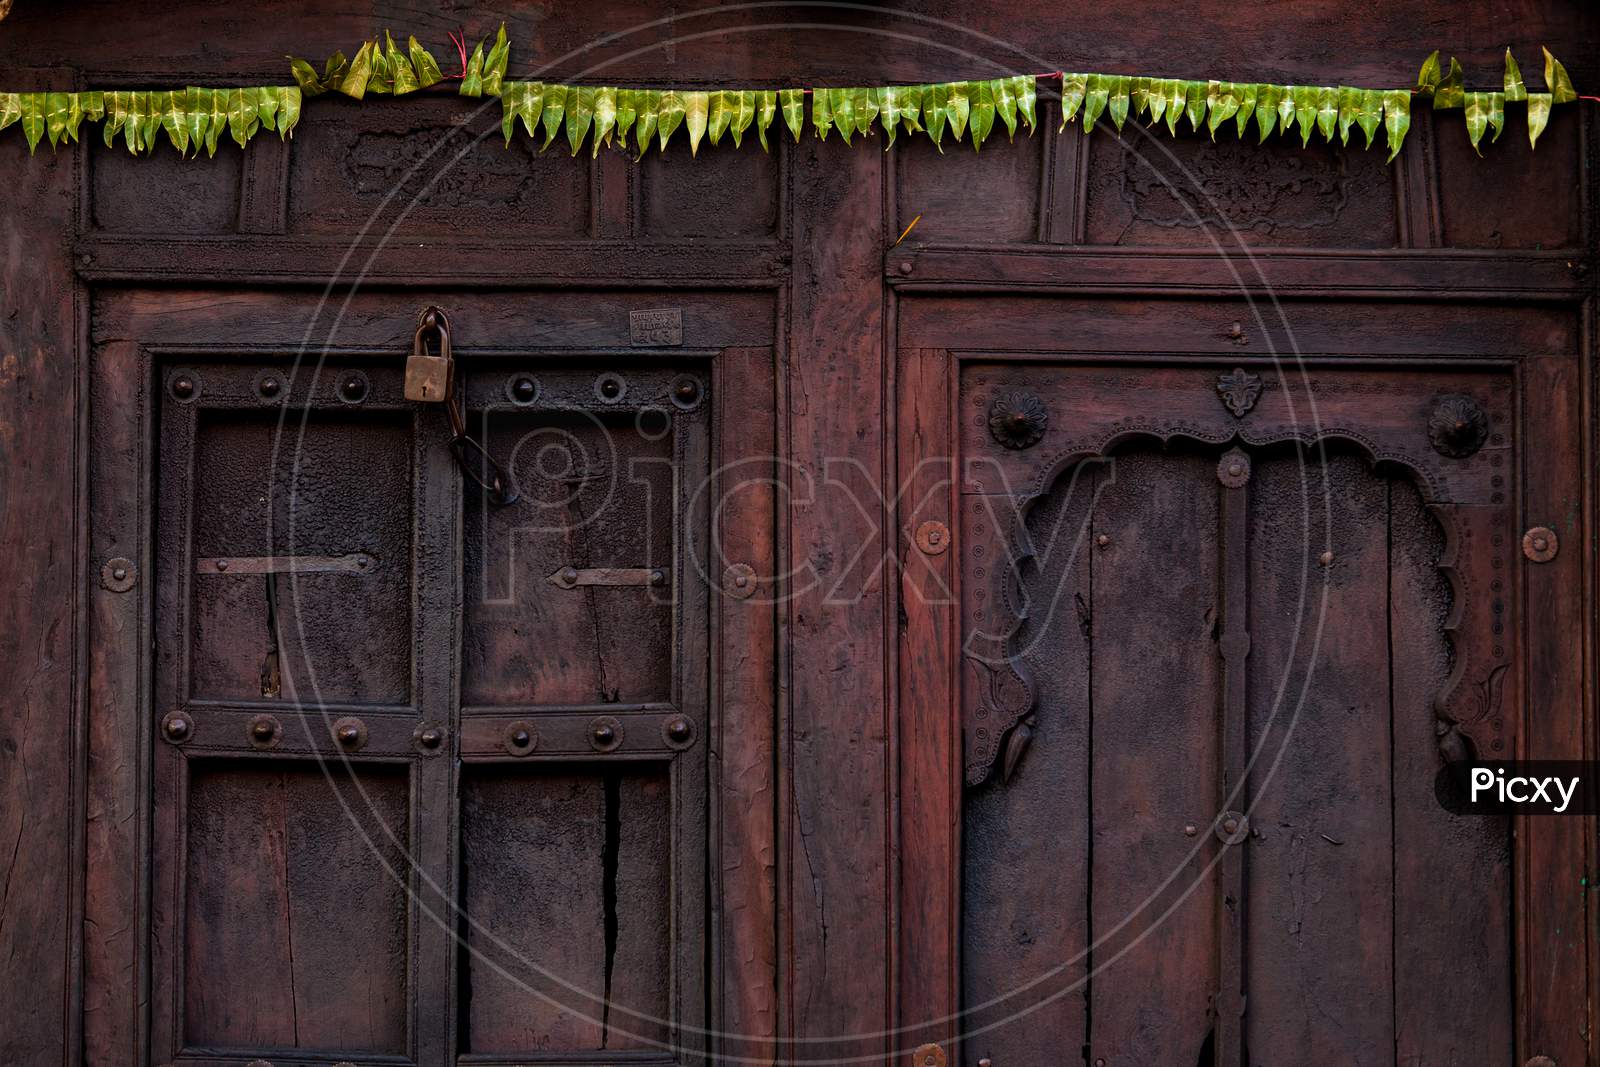 A Locked Wooden Door With Interesting Color & Pattern From A Village In India.